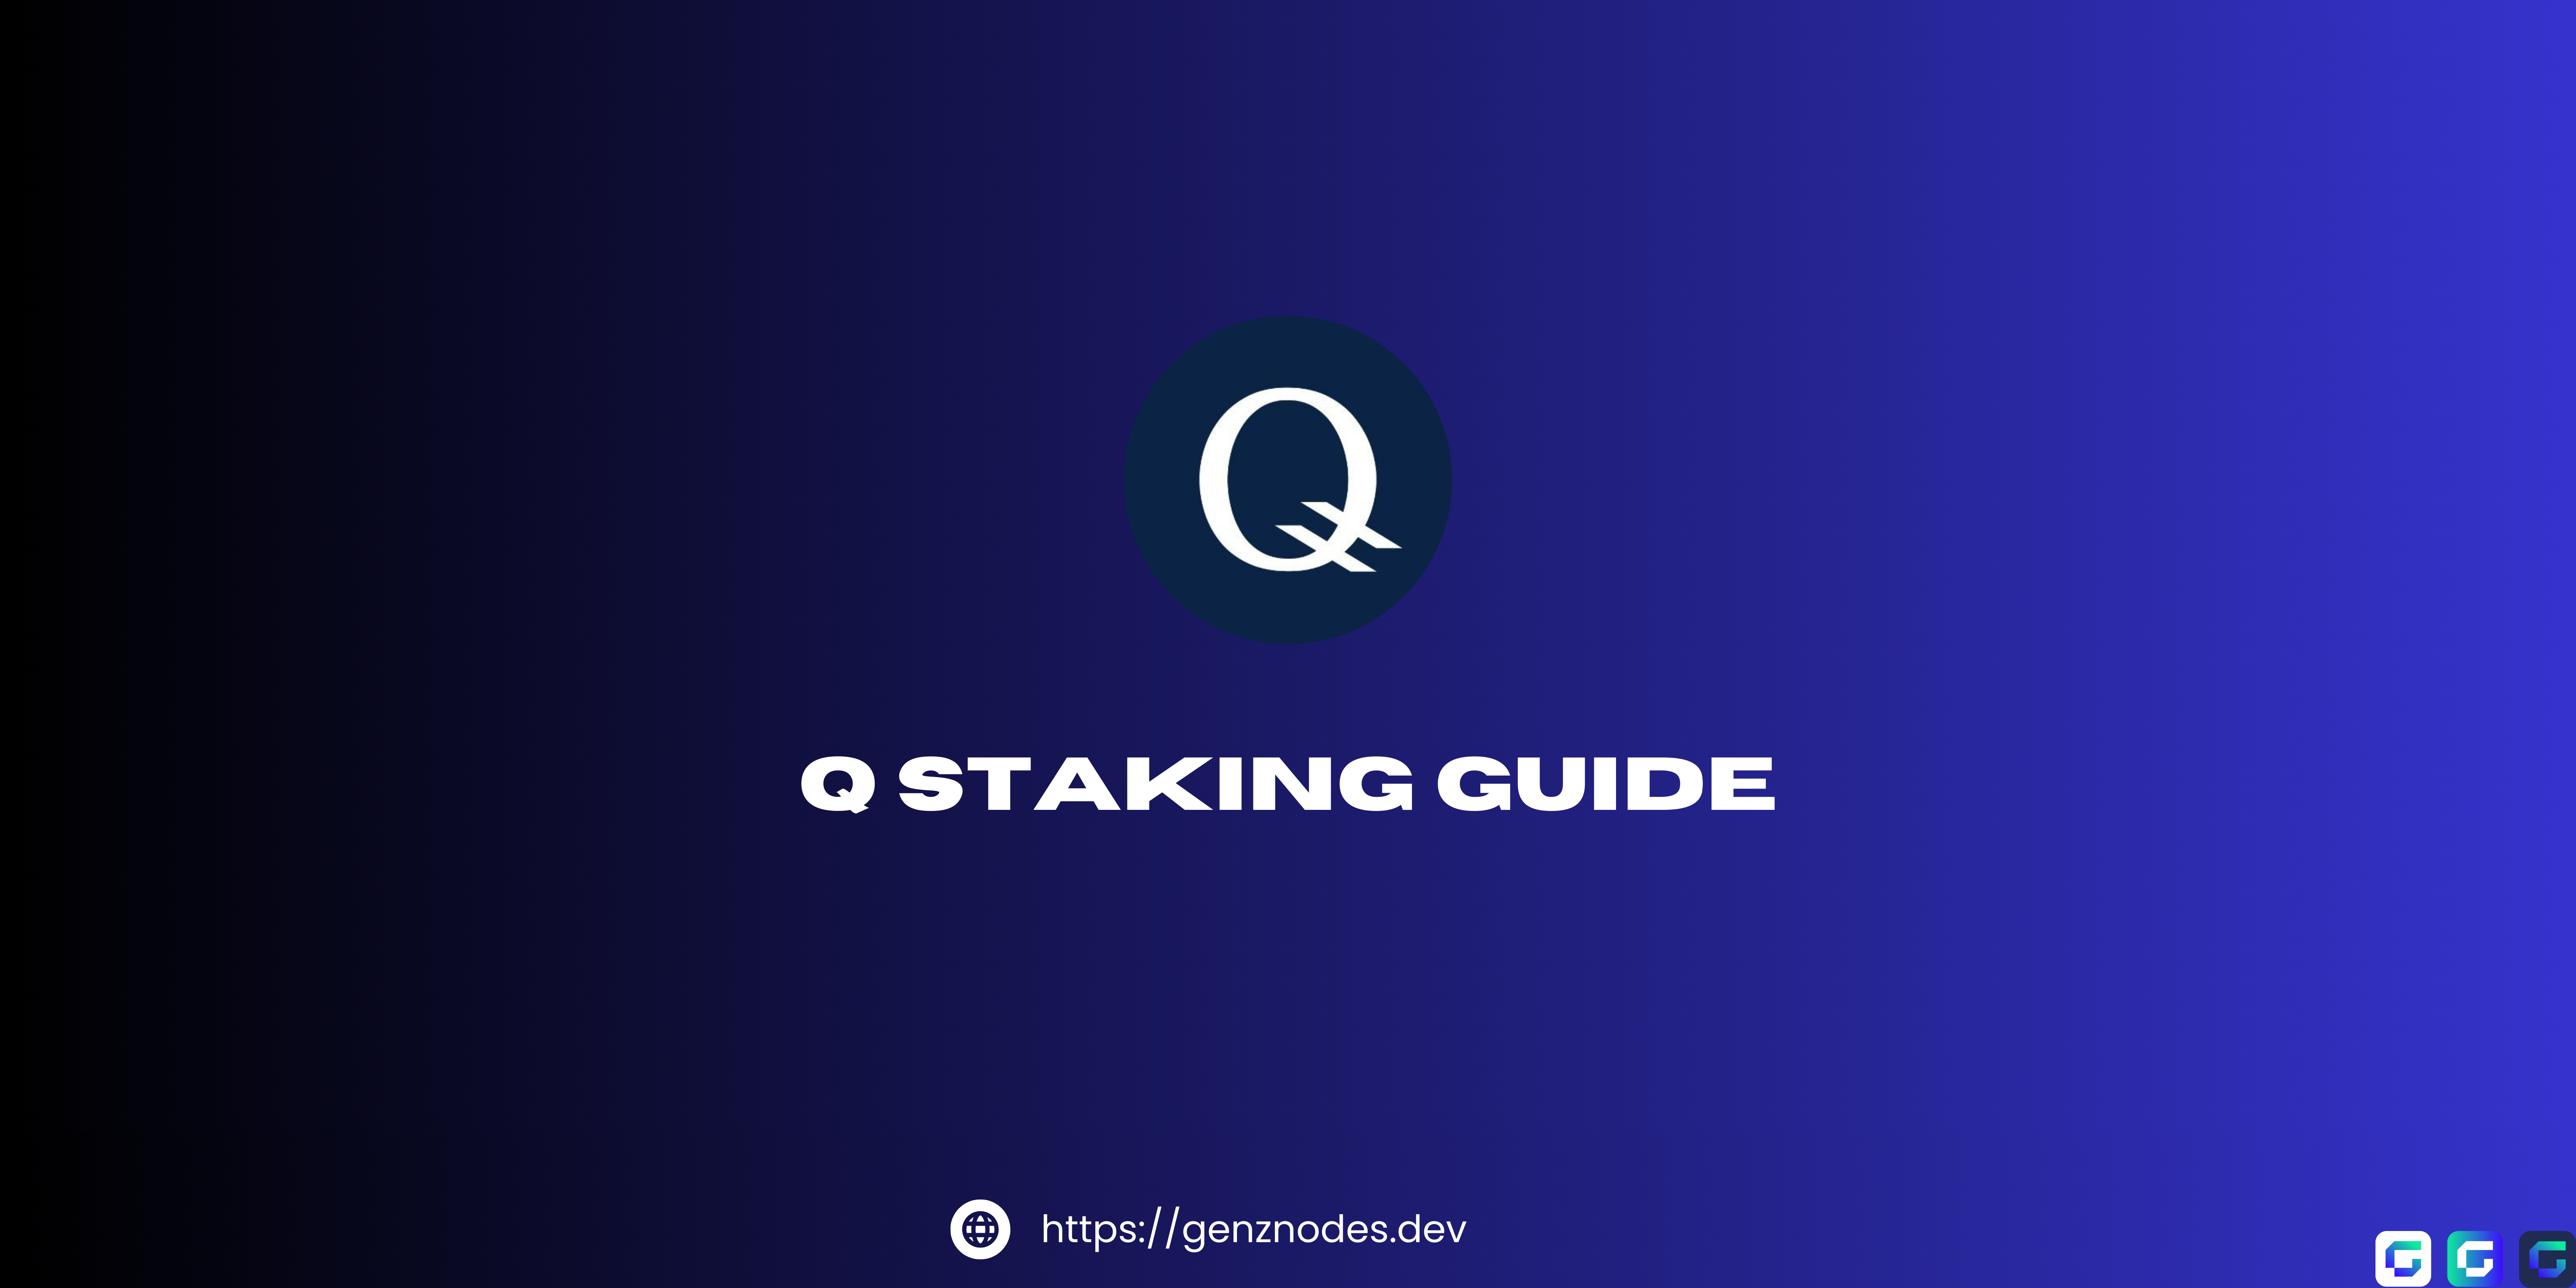 How to Delegate/Stake Your Q Token anda gain income